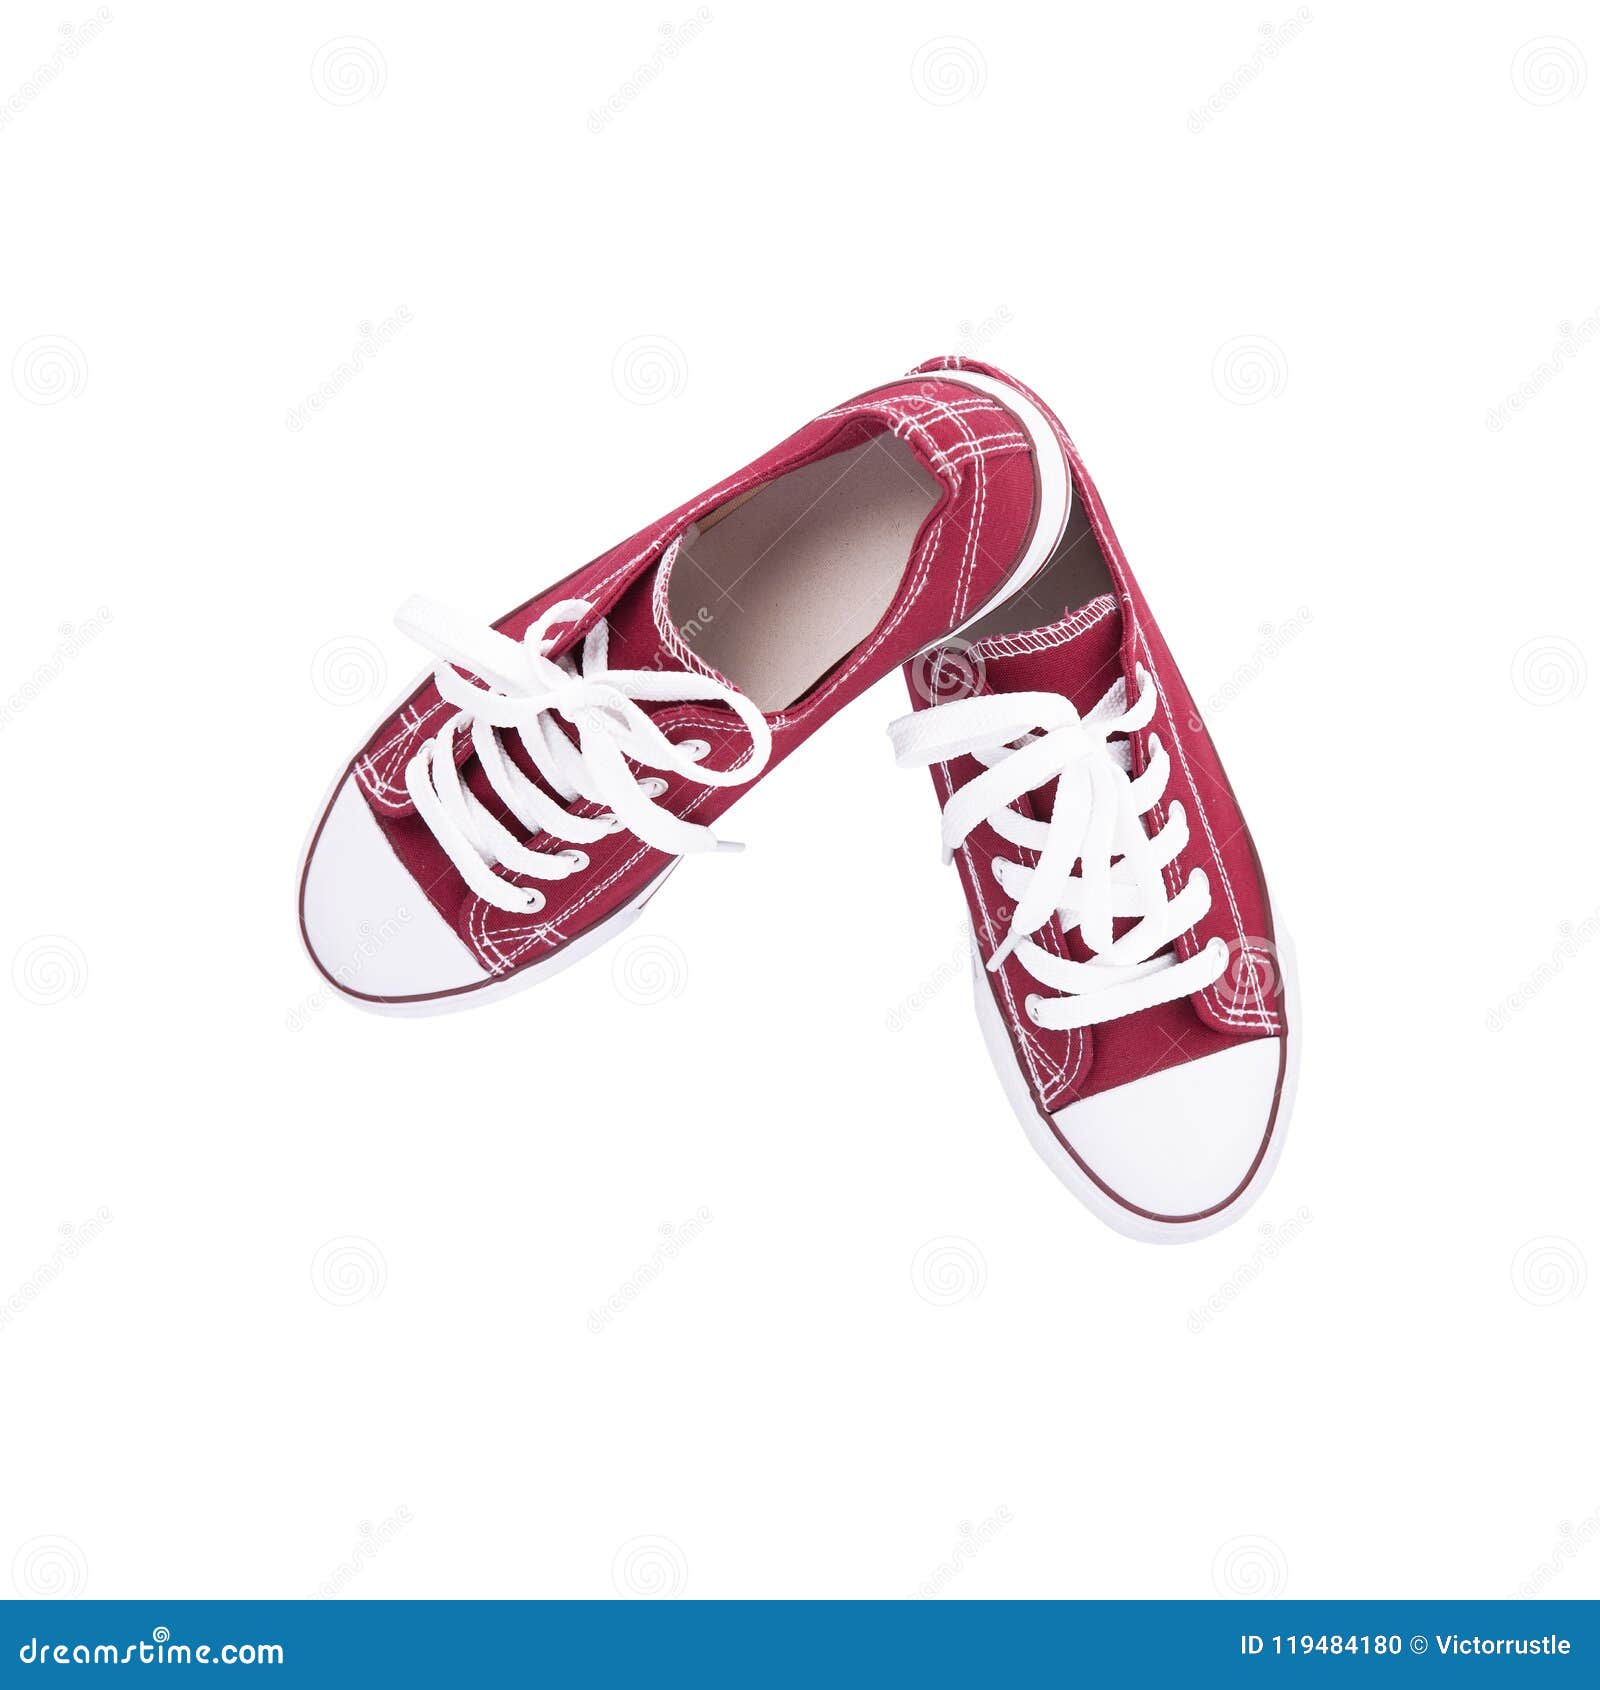 Red Sneakers Top View Isolated on White Background Stock Photo - Image ...